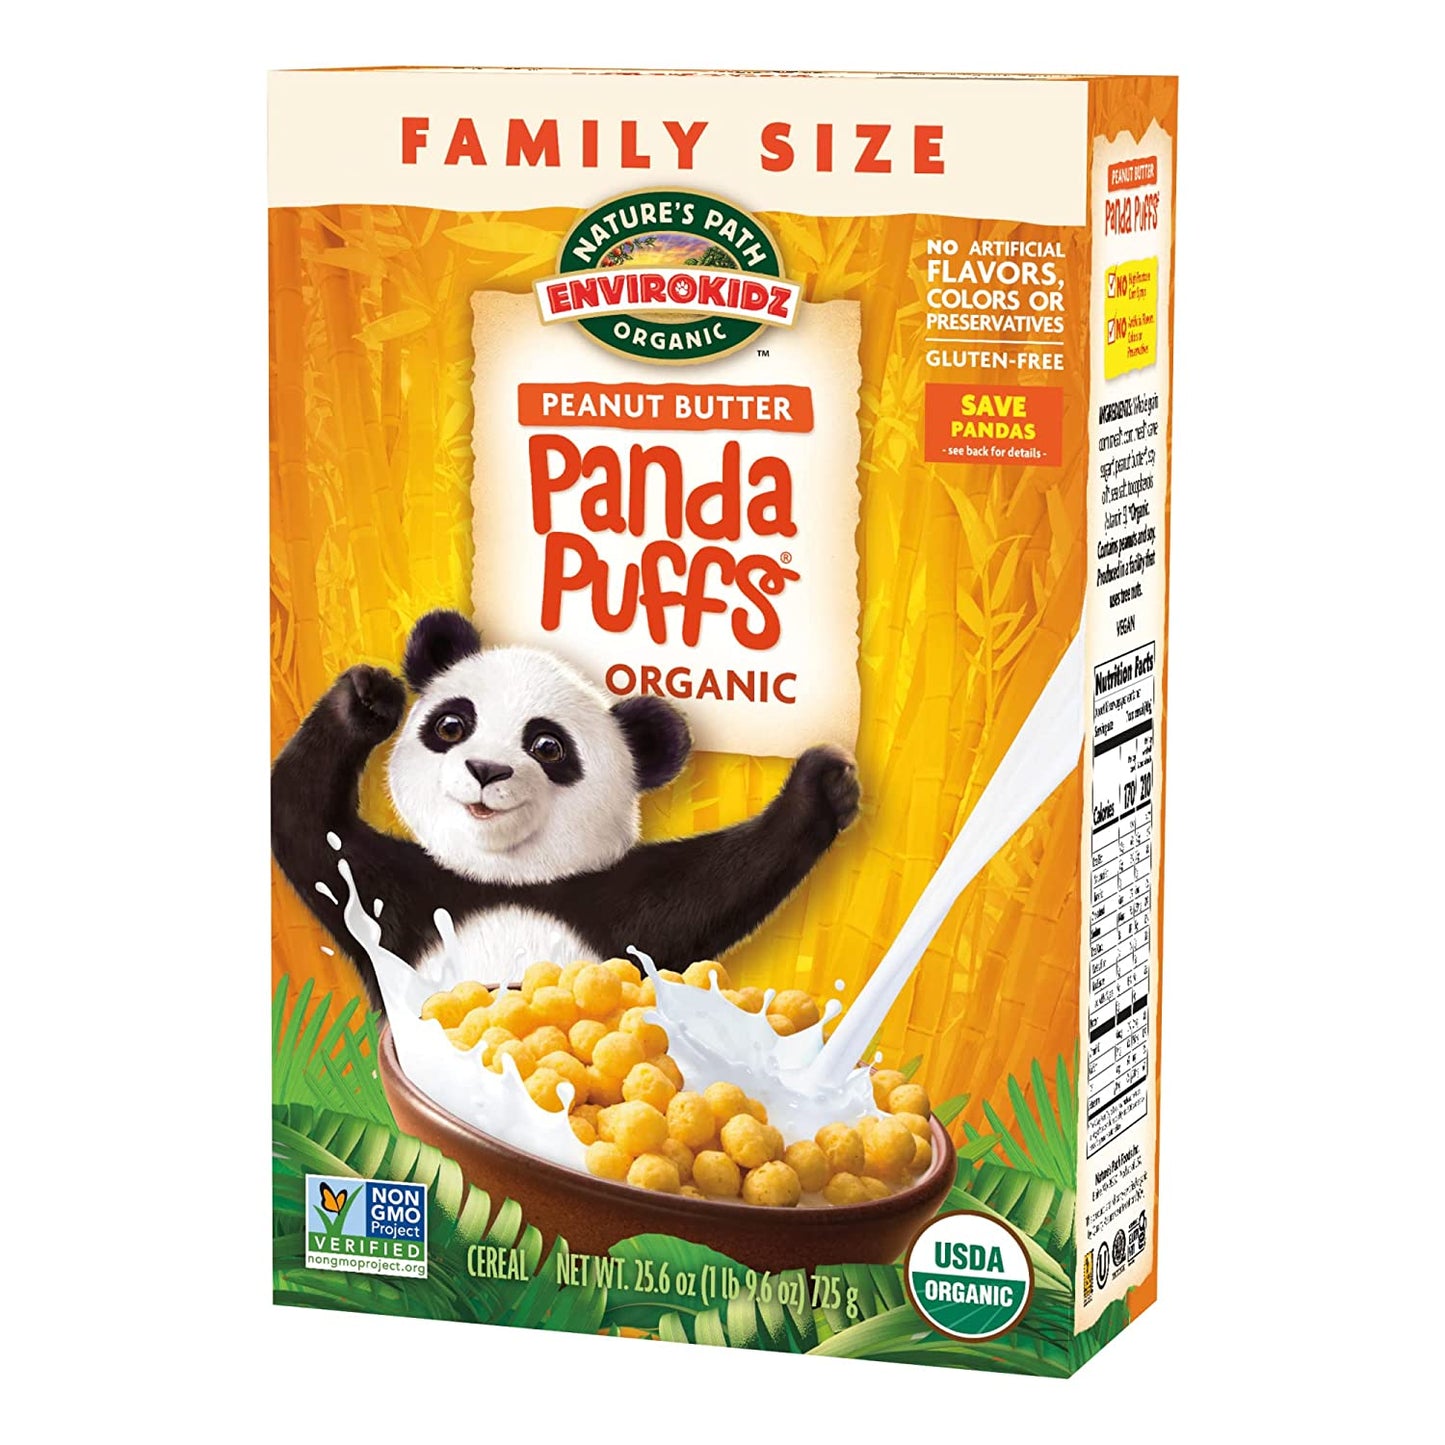 Panda Puffs Organic Peanut Butter Cereal, 25.6 Ounce (Pack of 6)